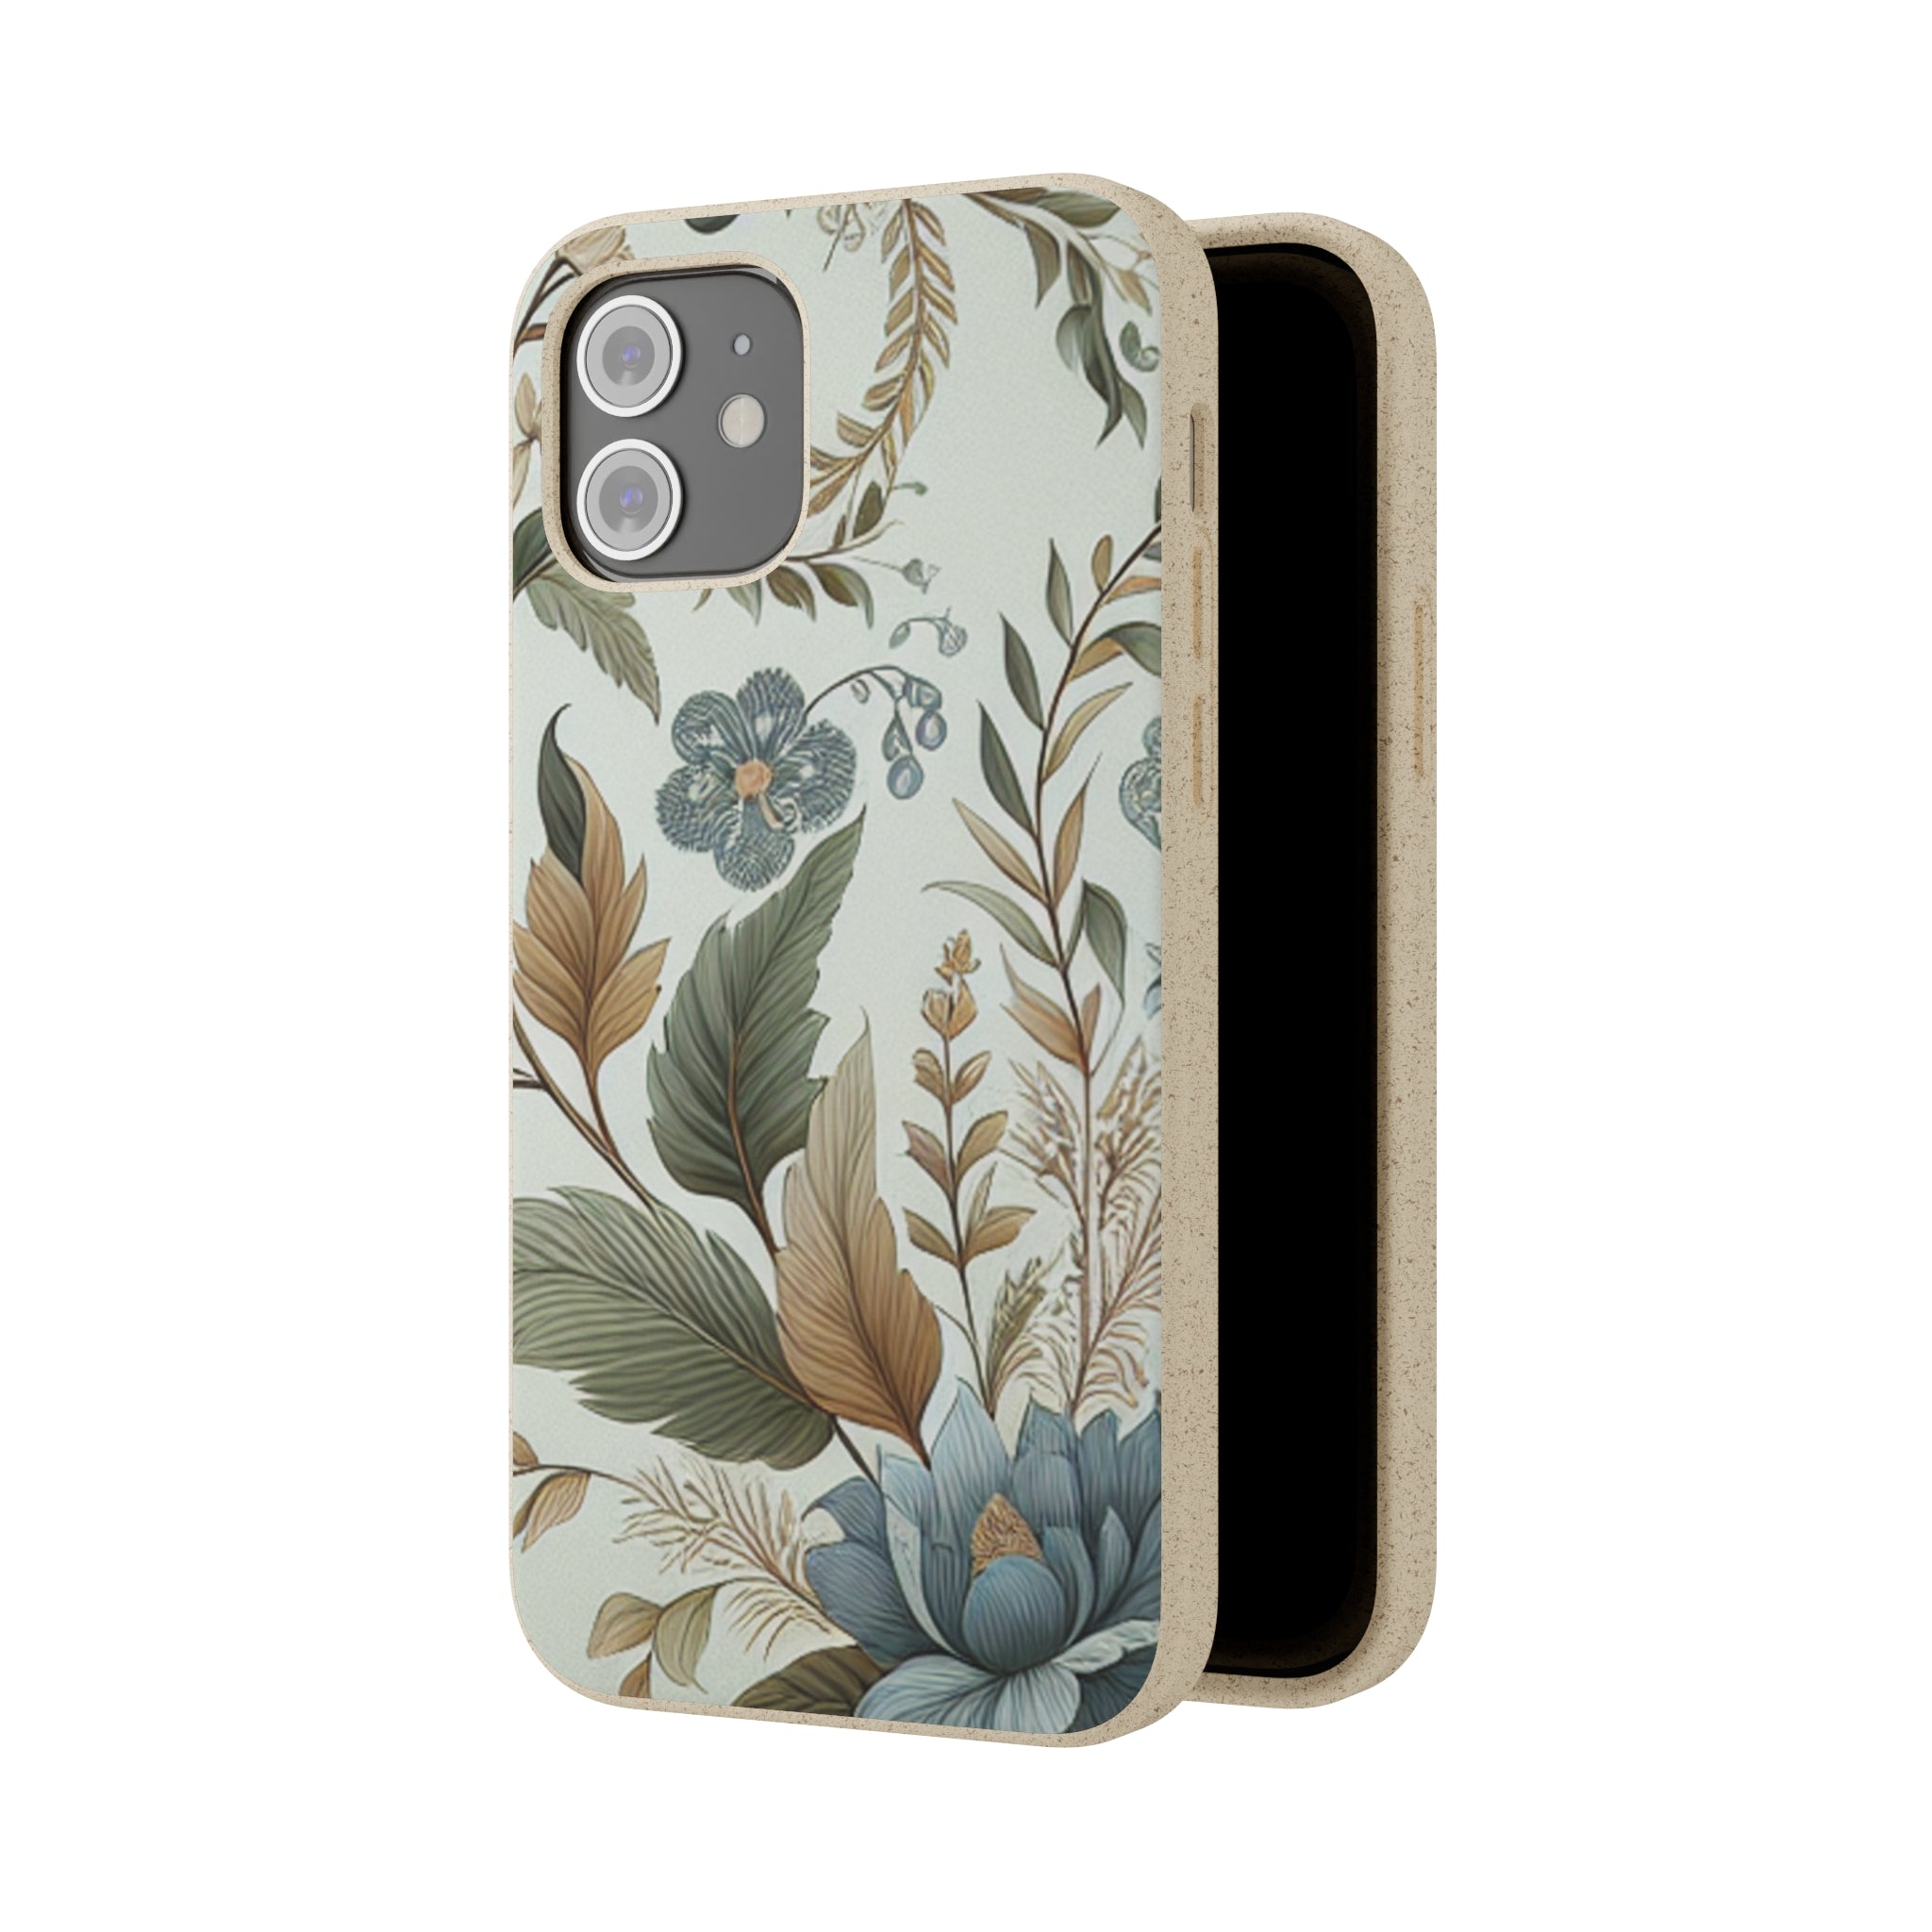 Galen Stone - Biodegradable iPhone Cases